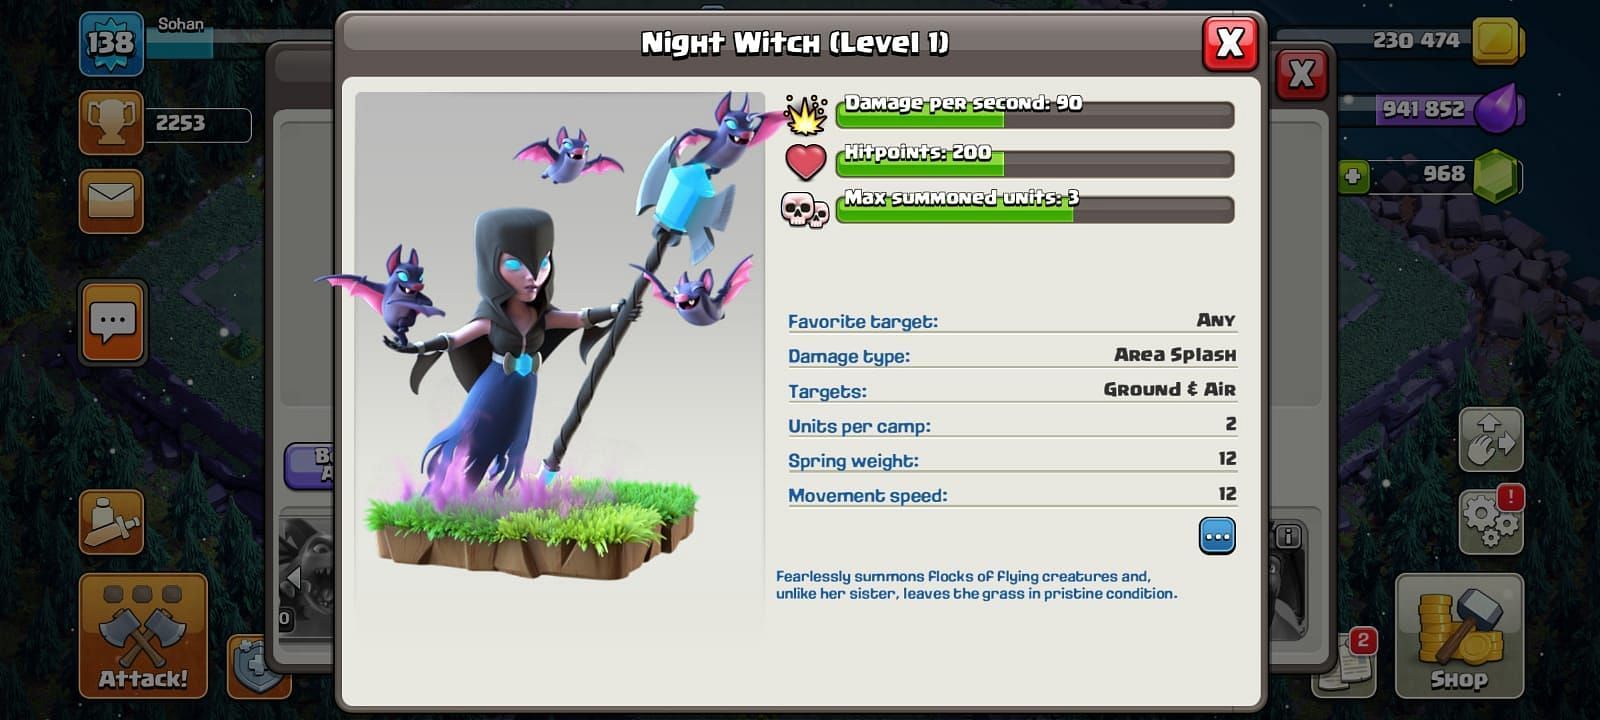 The Night Witch in Clash of Clans (Image via Sportskeeda)